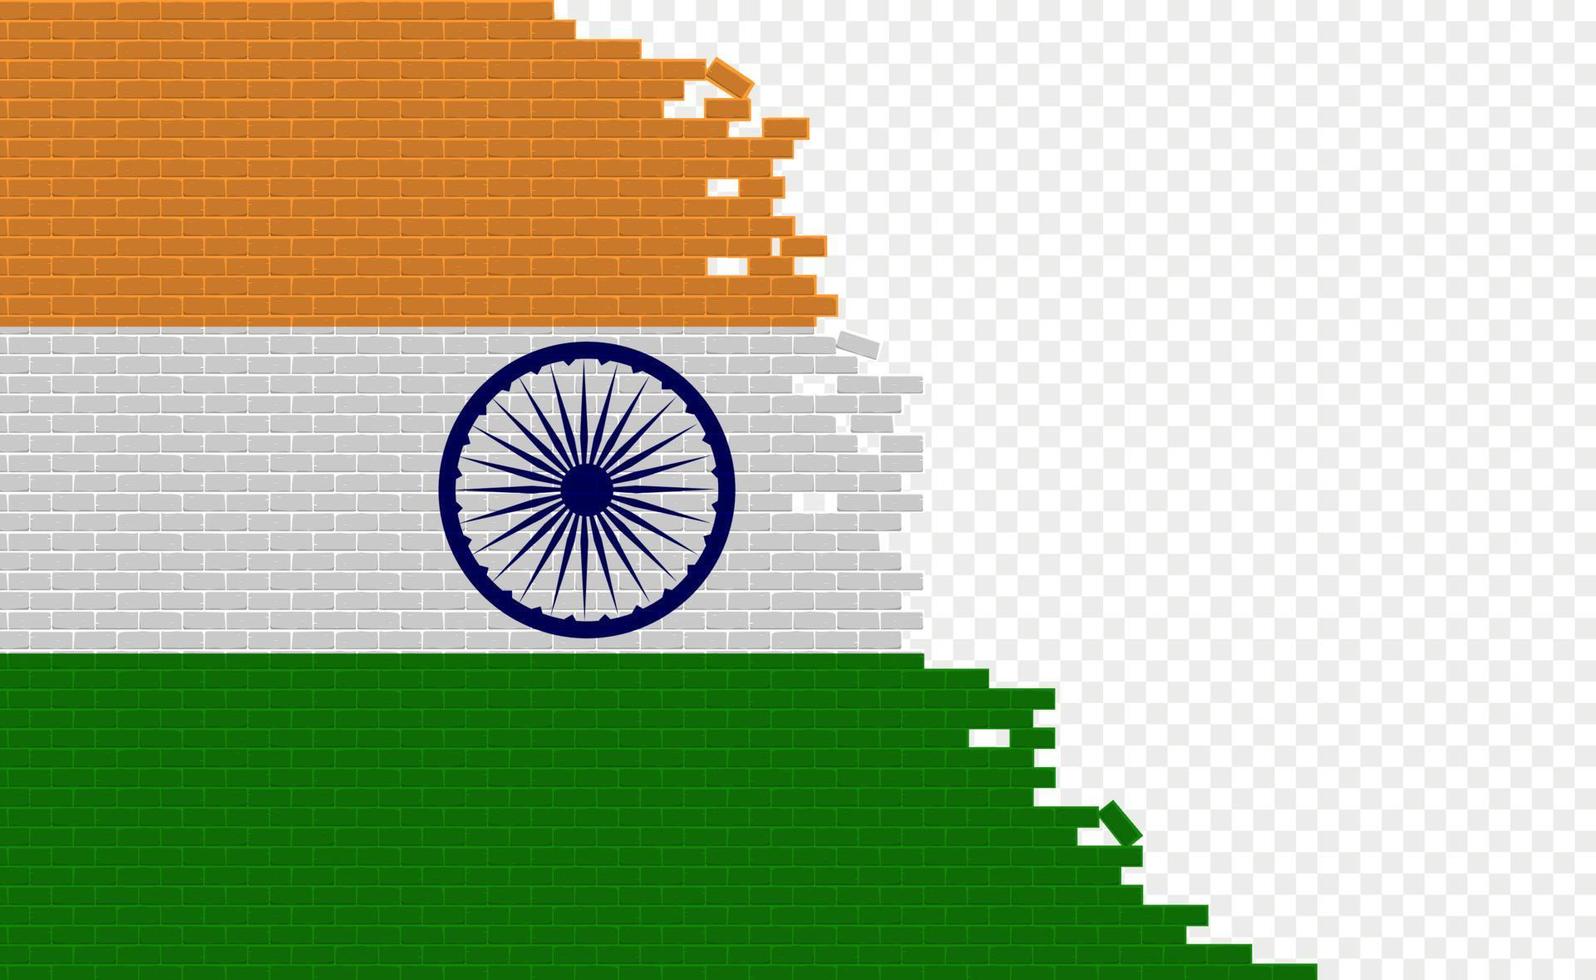 India flag on broken brick wall. Empty flag field of another country. Country comparison. Easy editing and vector in groups.